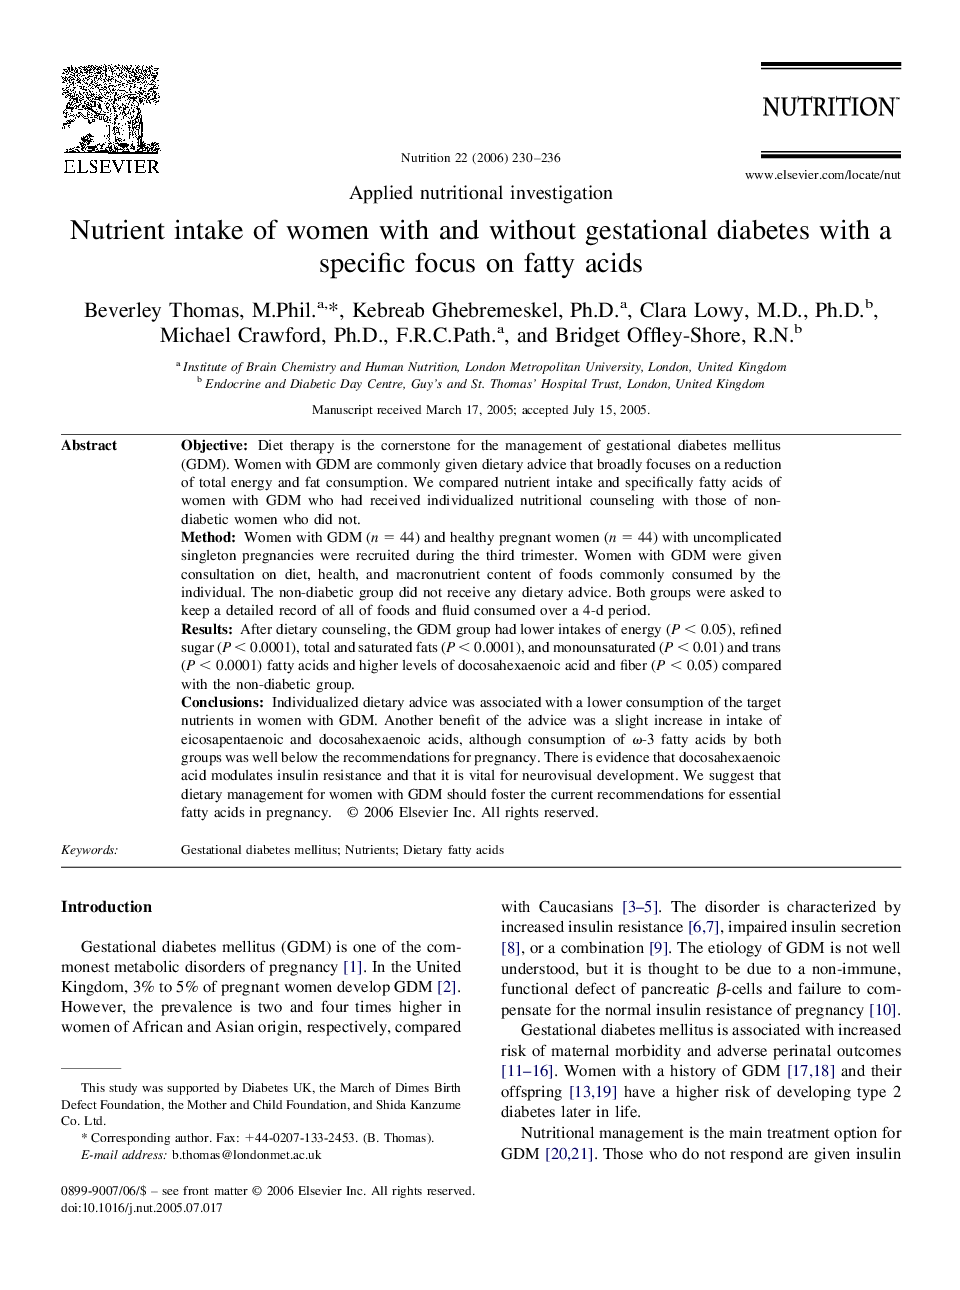 Nutrient intake of women with and without gestational diabetes with a specific focus on fatty acids 